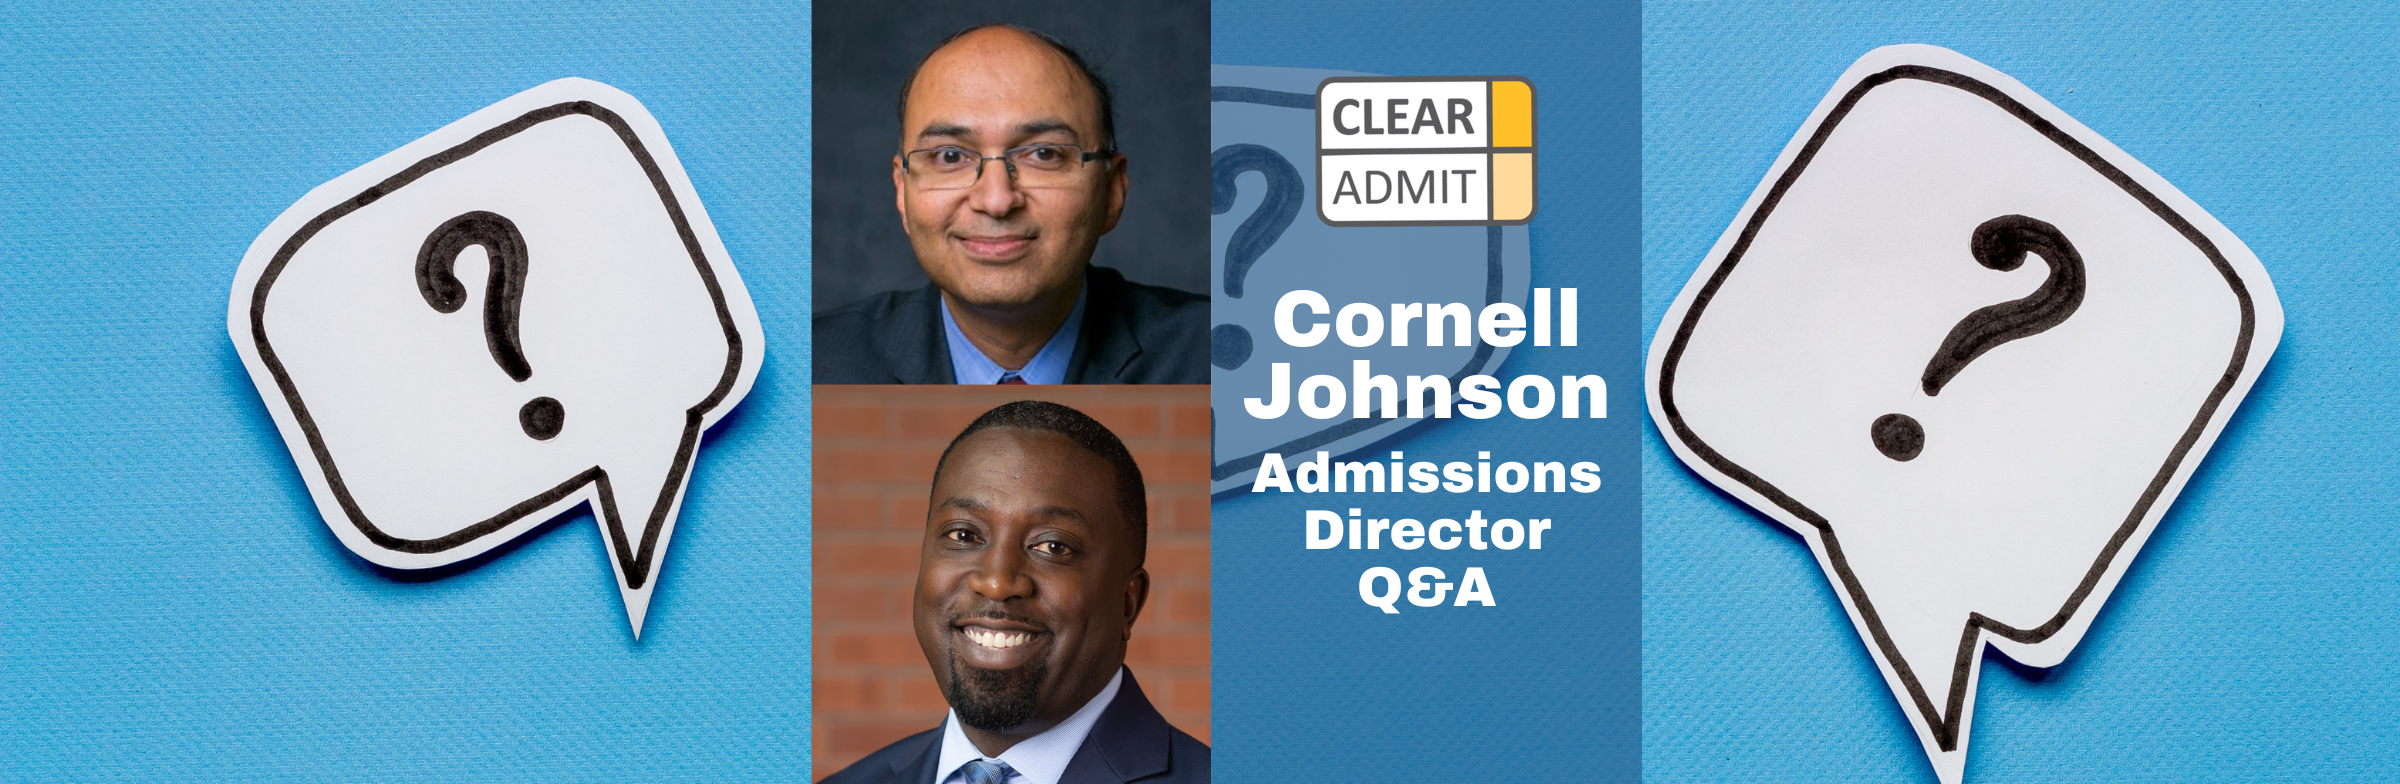 Image for Admissions Director Q&A: Eddie Asbie and Vishal Gaur of Cornell Johnson